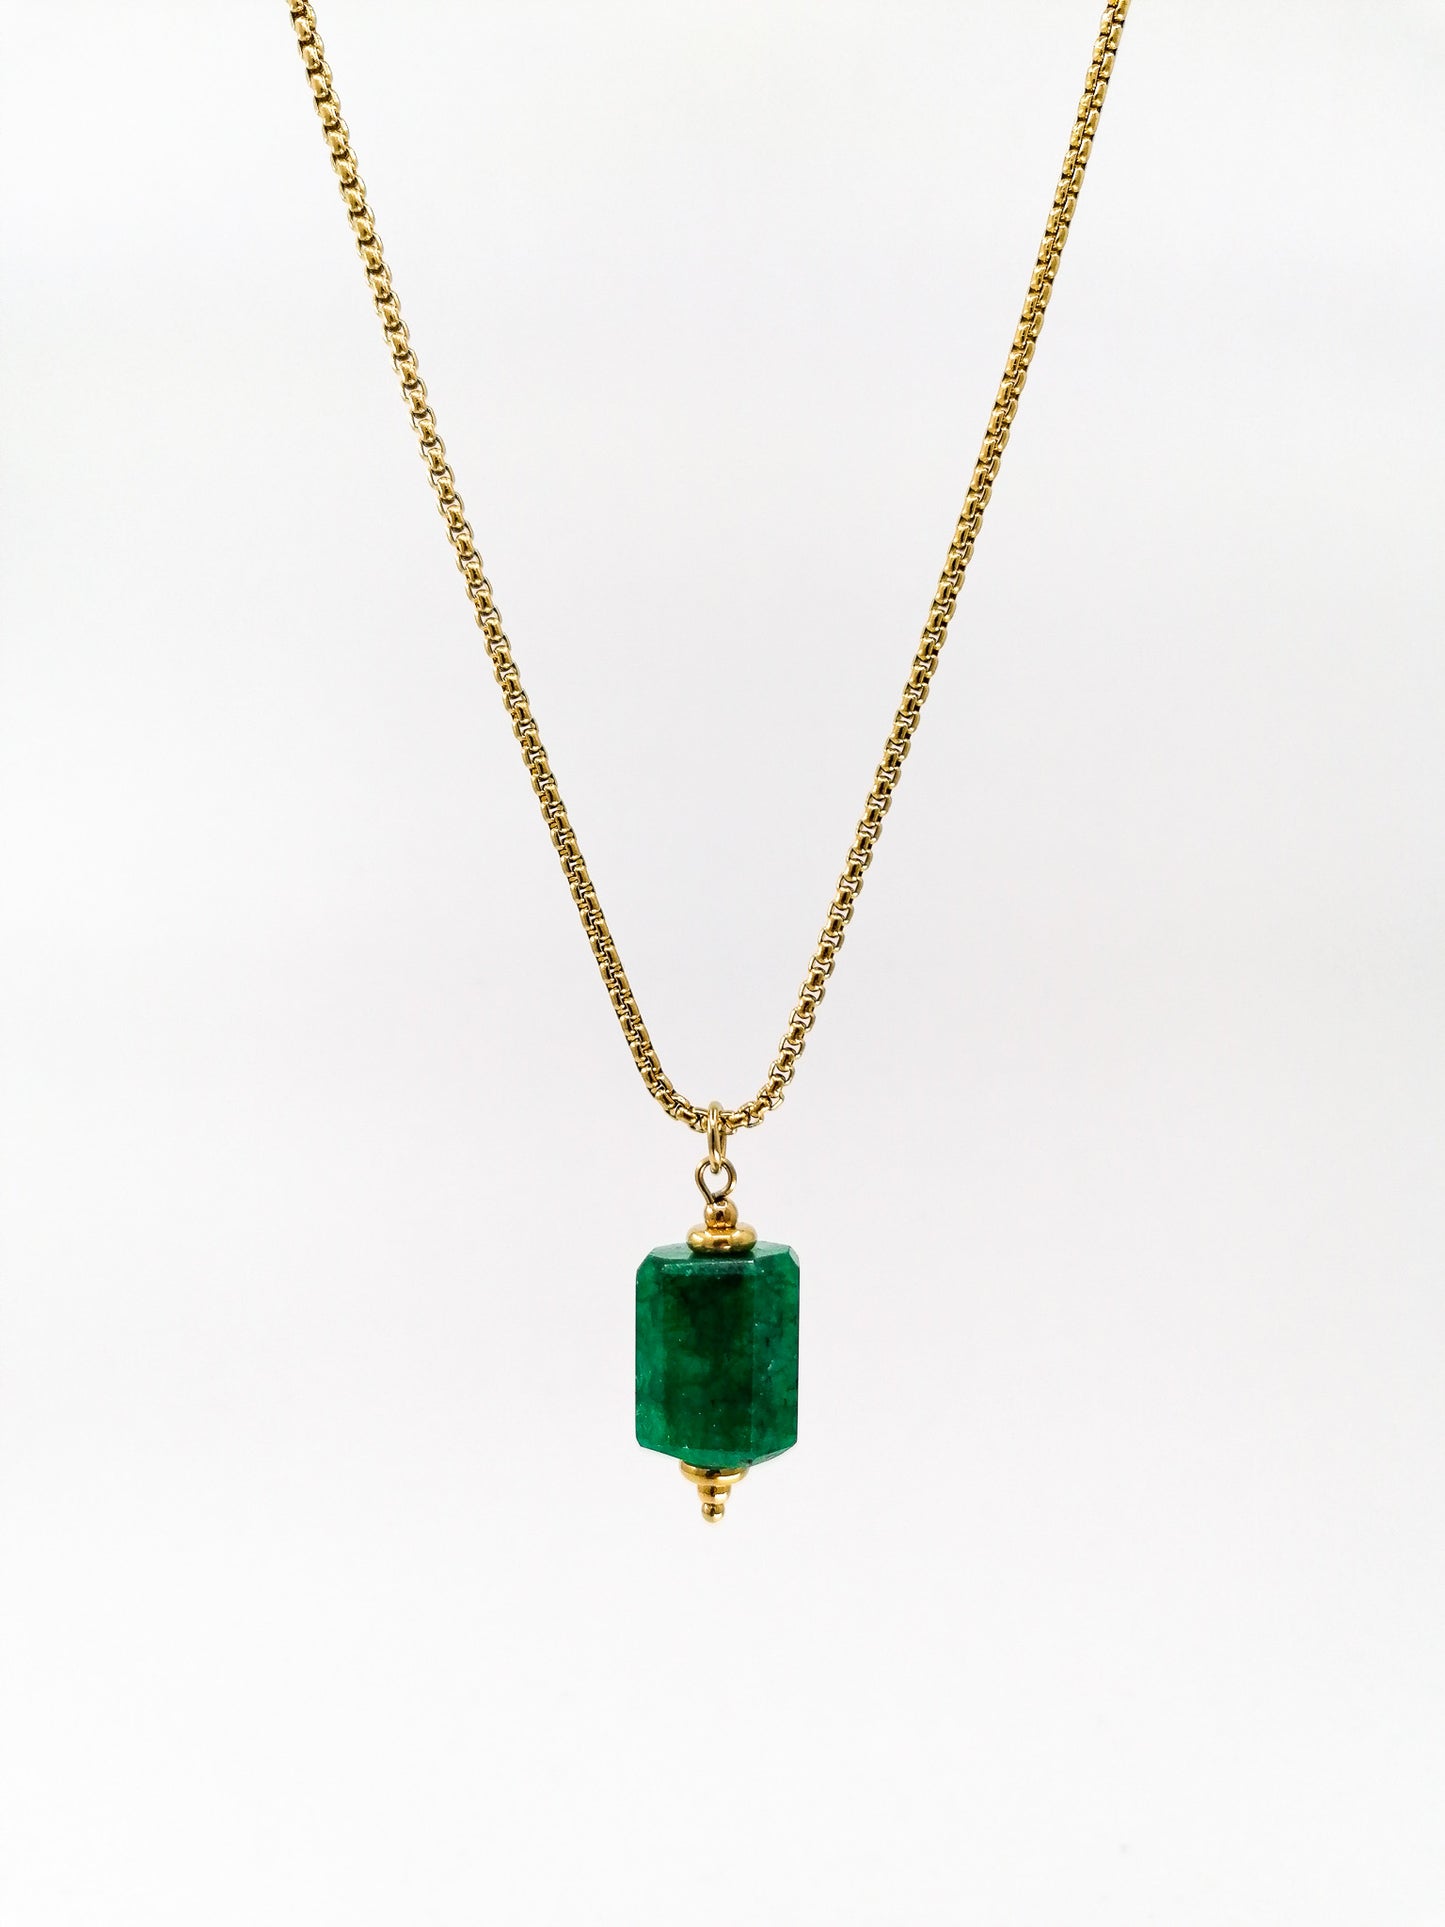 Emerald necklace - long box chain